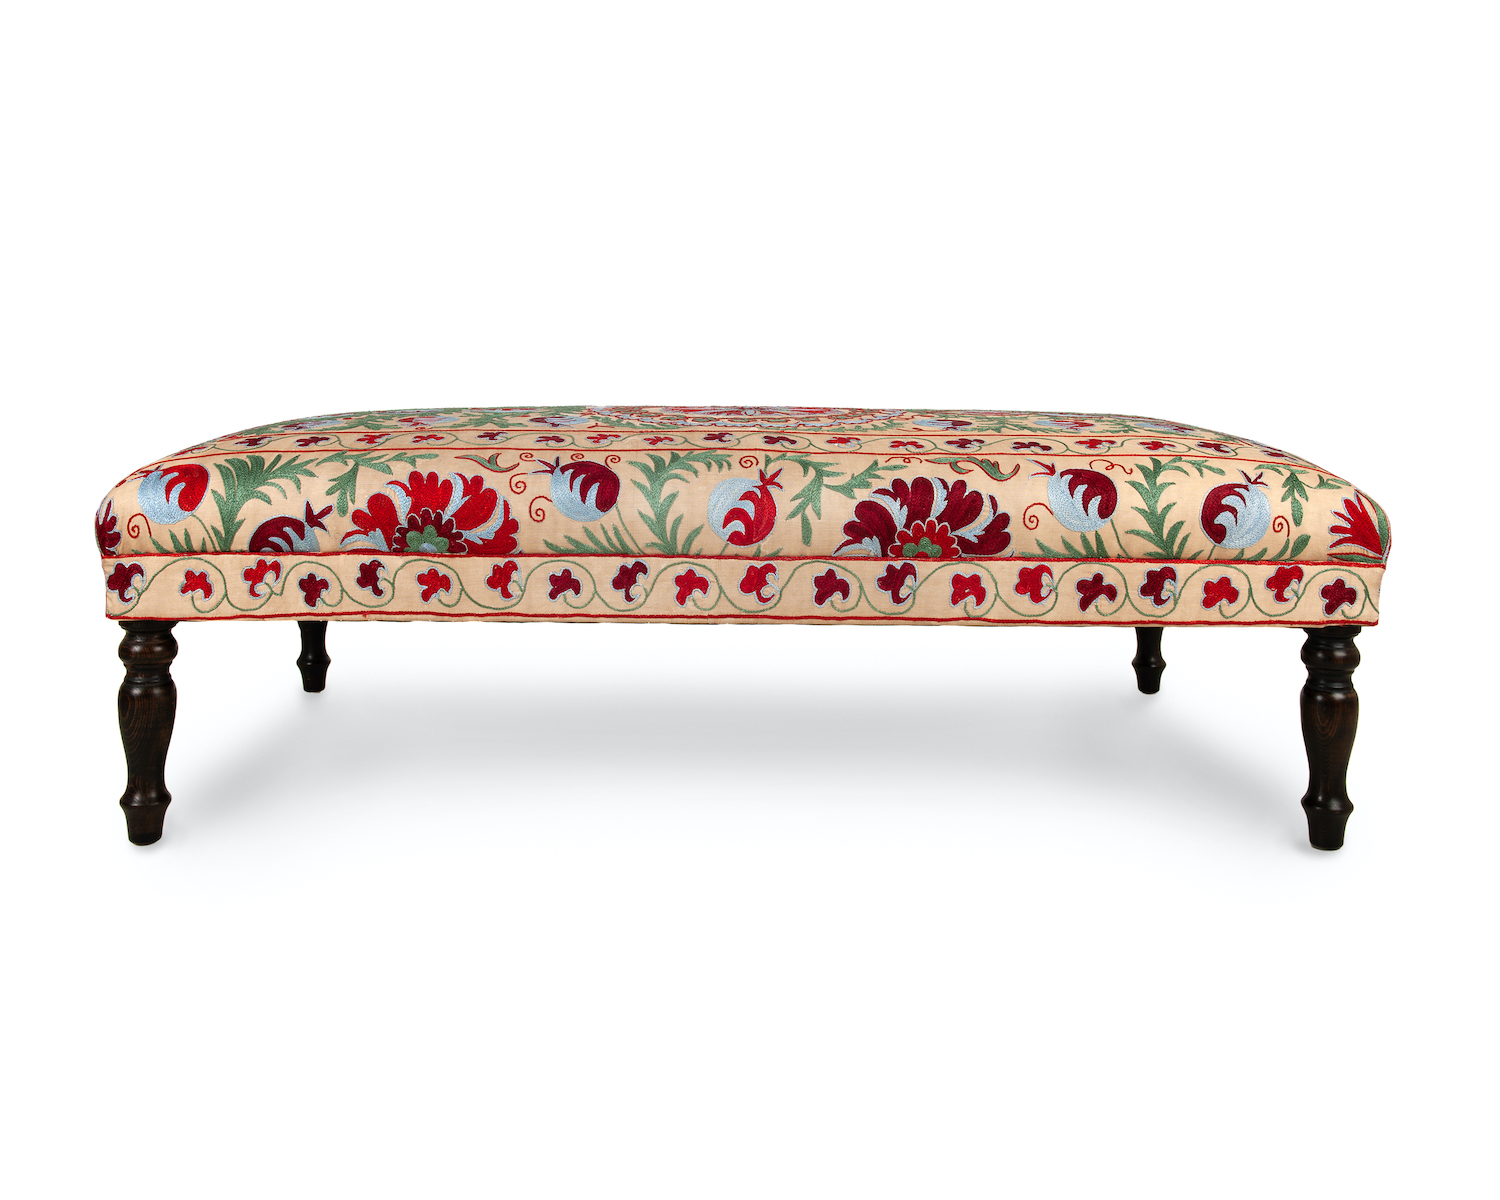 Footstool Created around Suzani Design with Running Border and Turned Legs